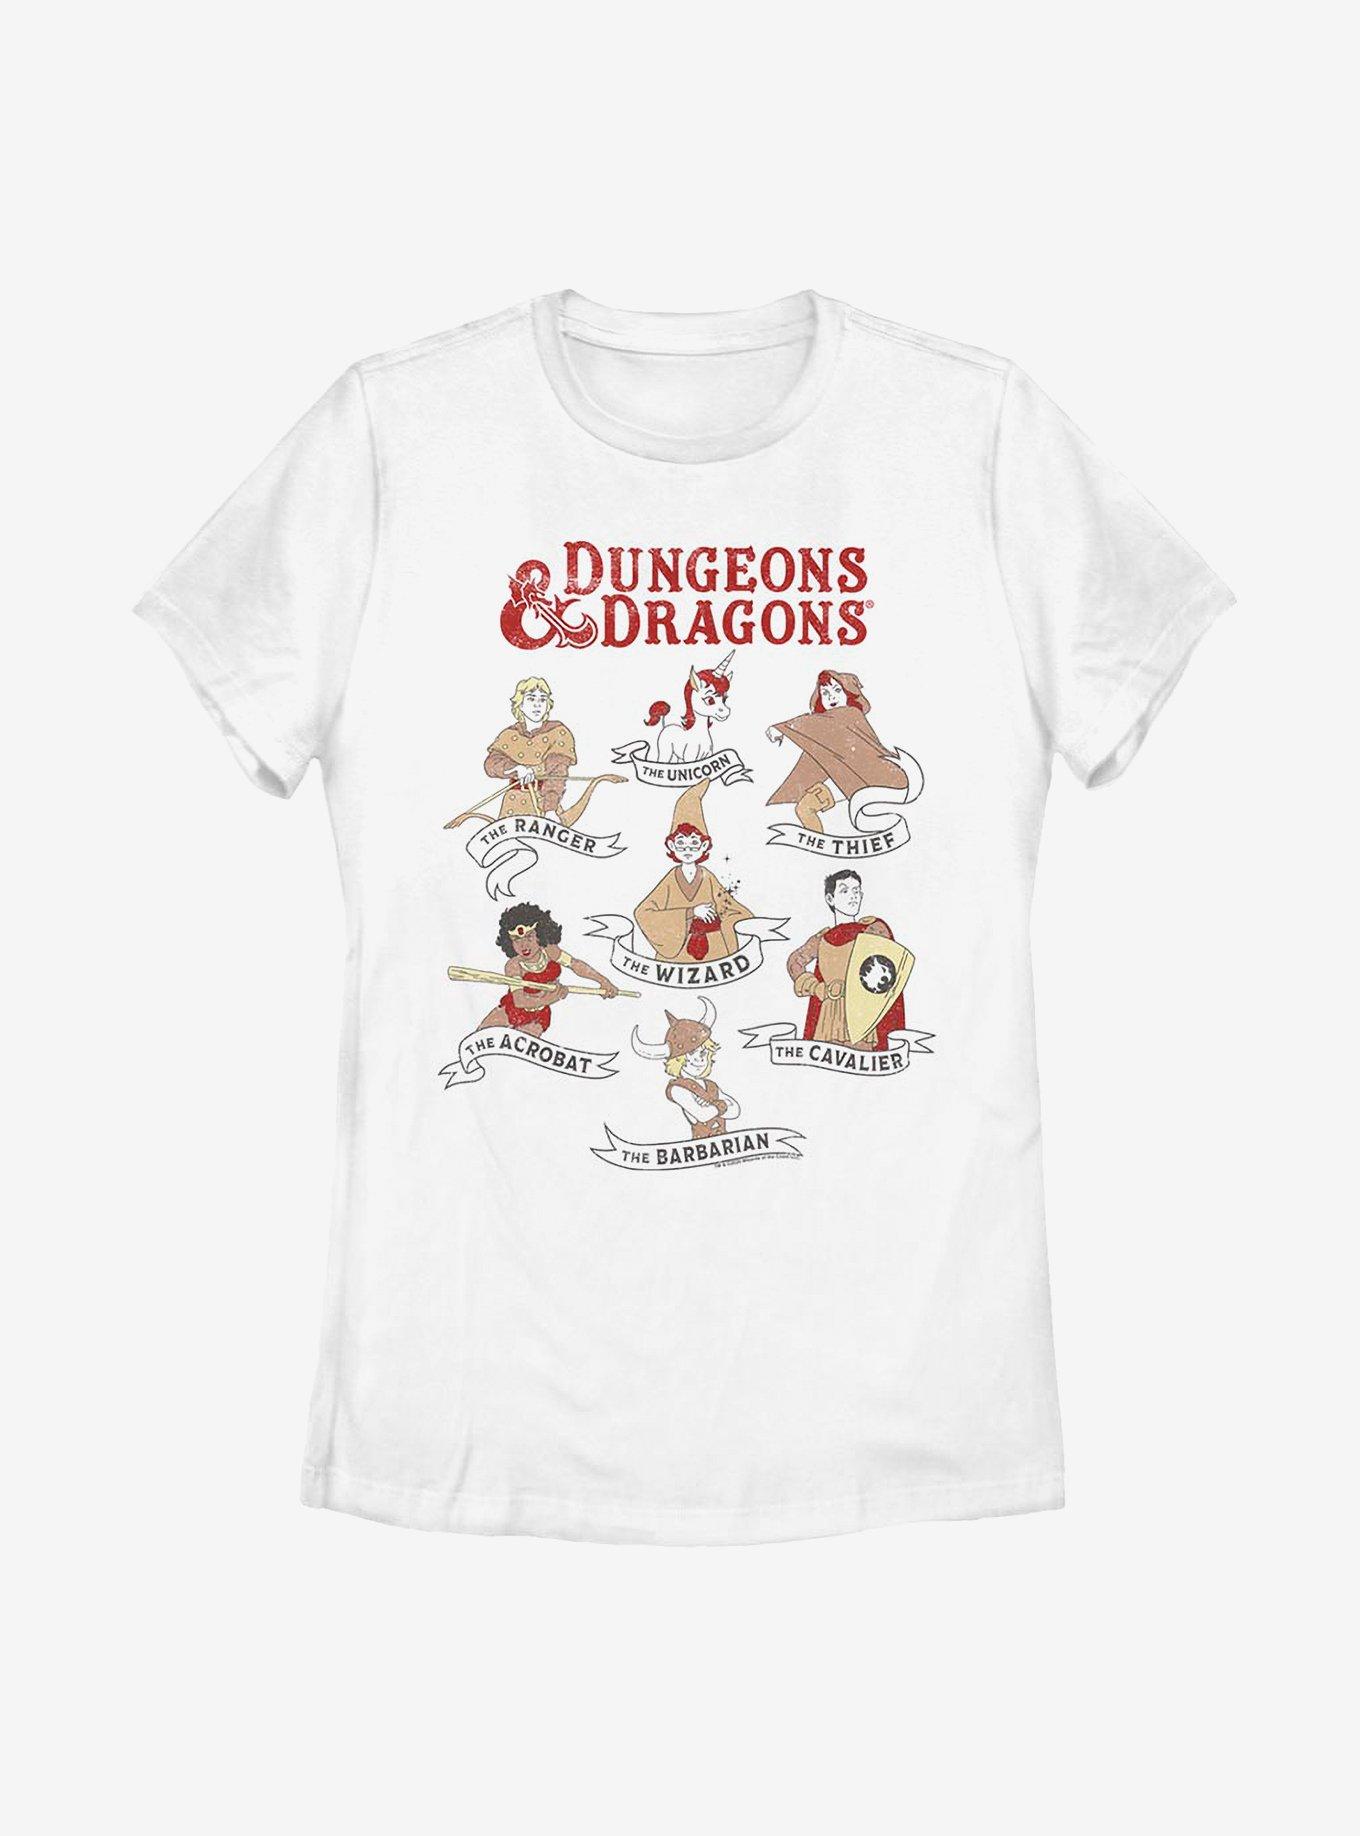 Dungeons & Dragons Textbook Players Womens T-Shirt, WHITE, hi-res